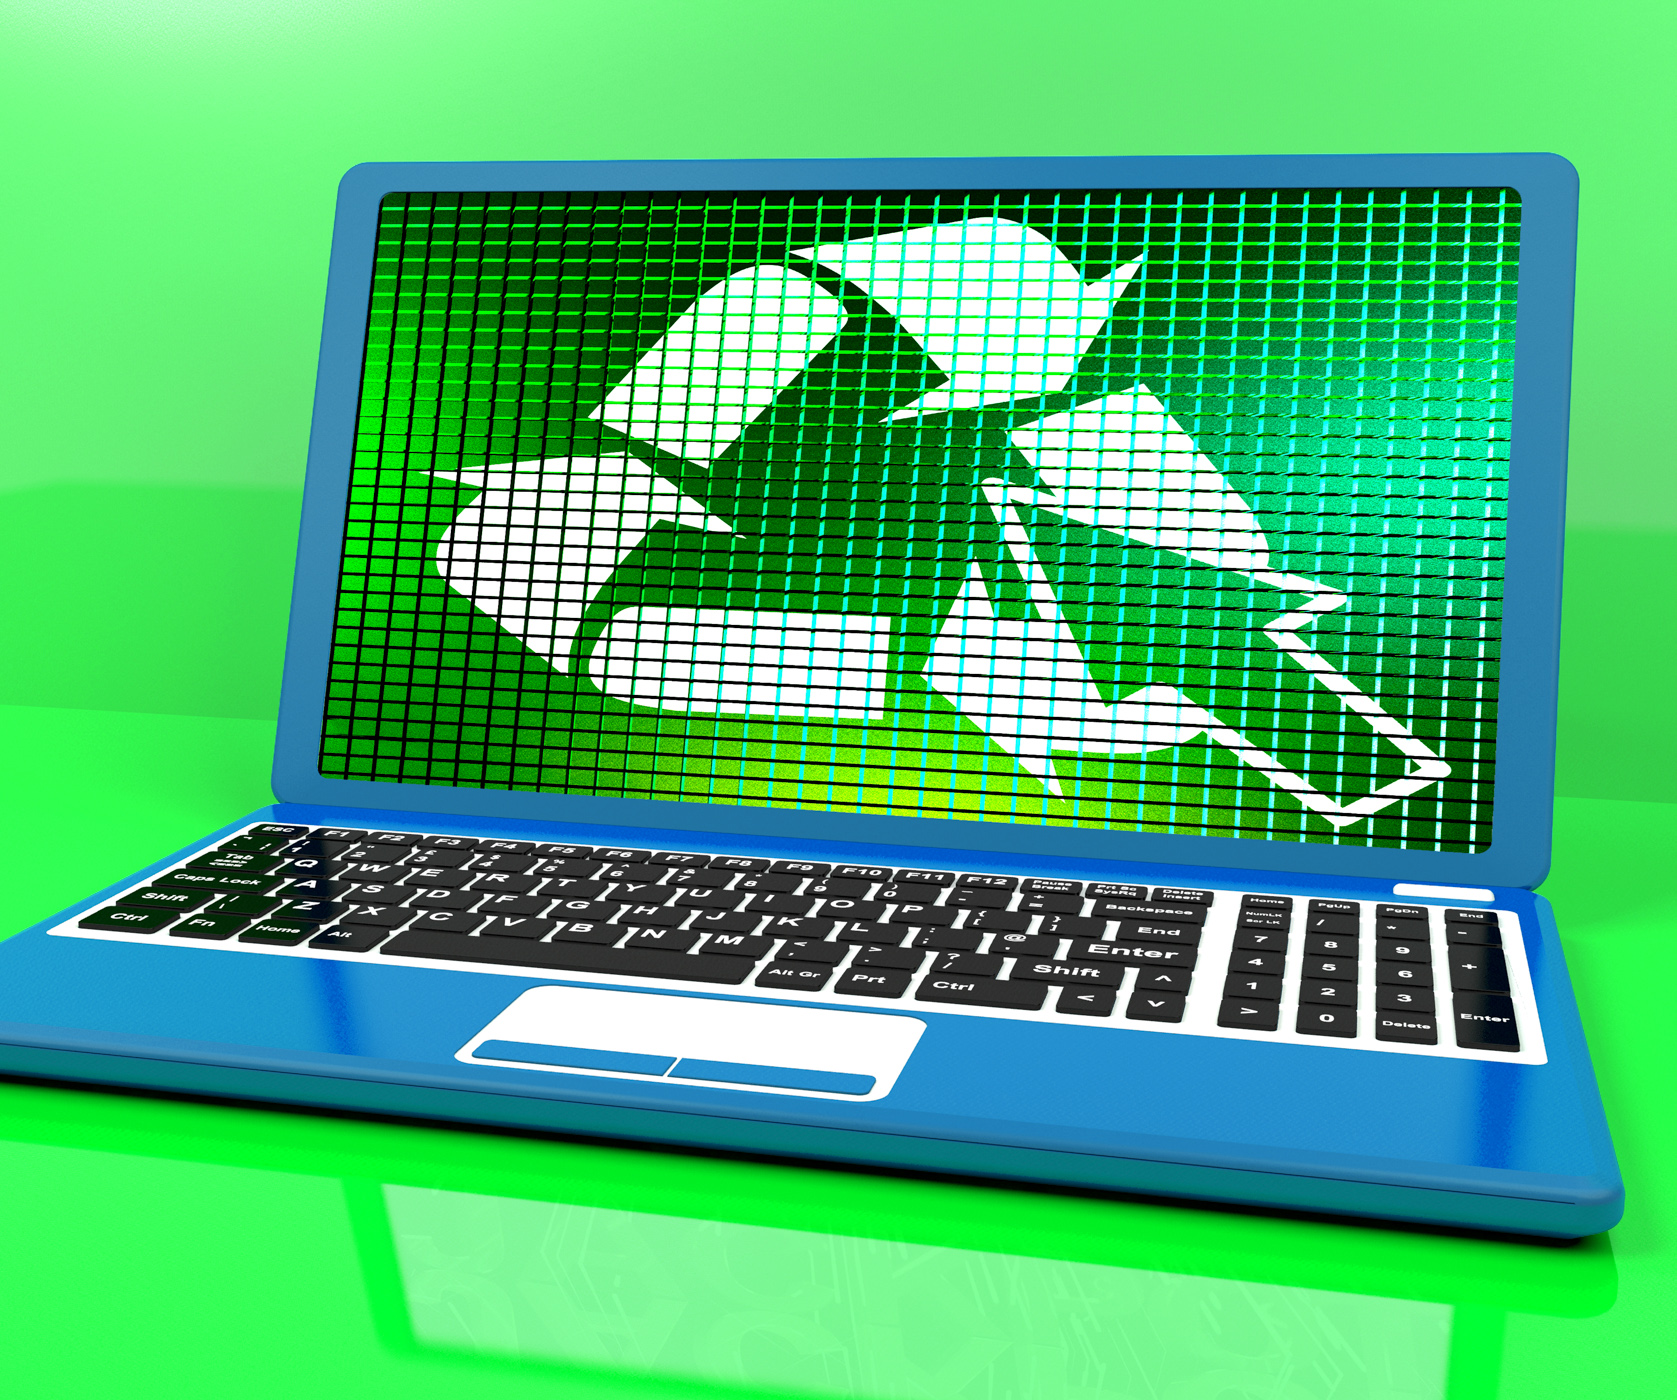 Recycle icon on laptop showing recycling and eco friendly photo